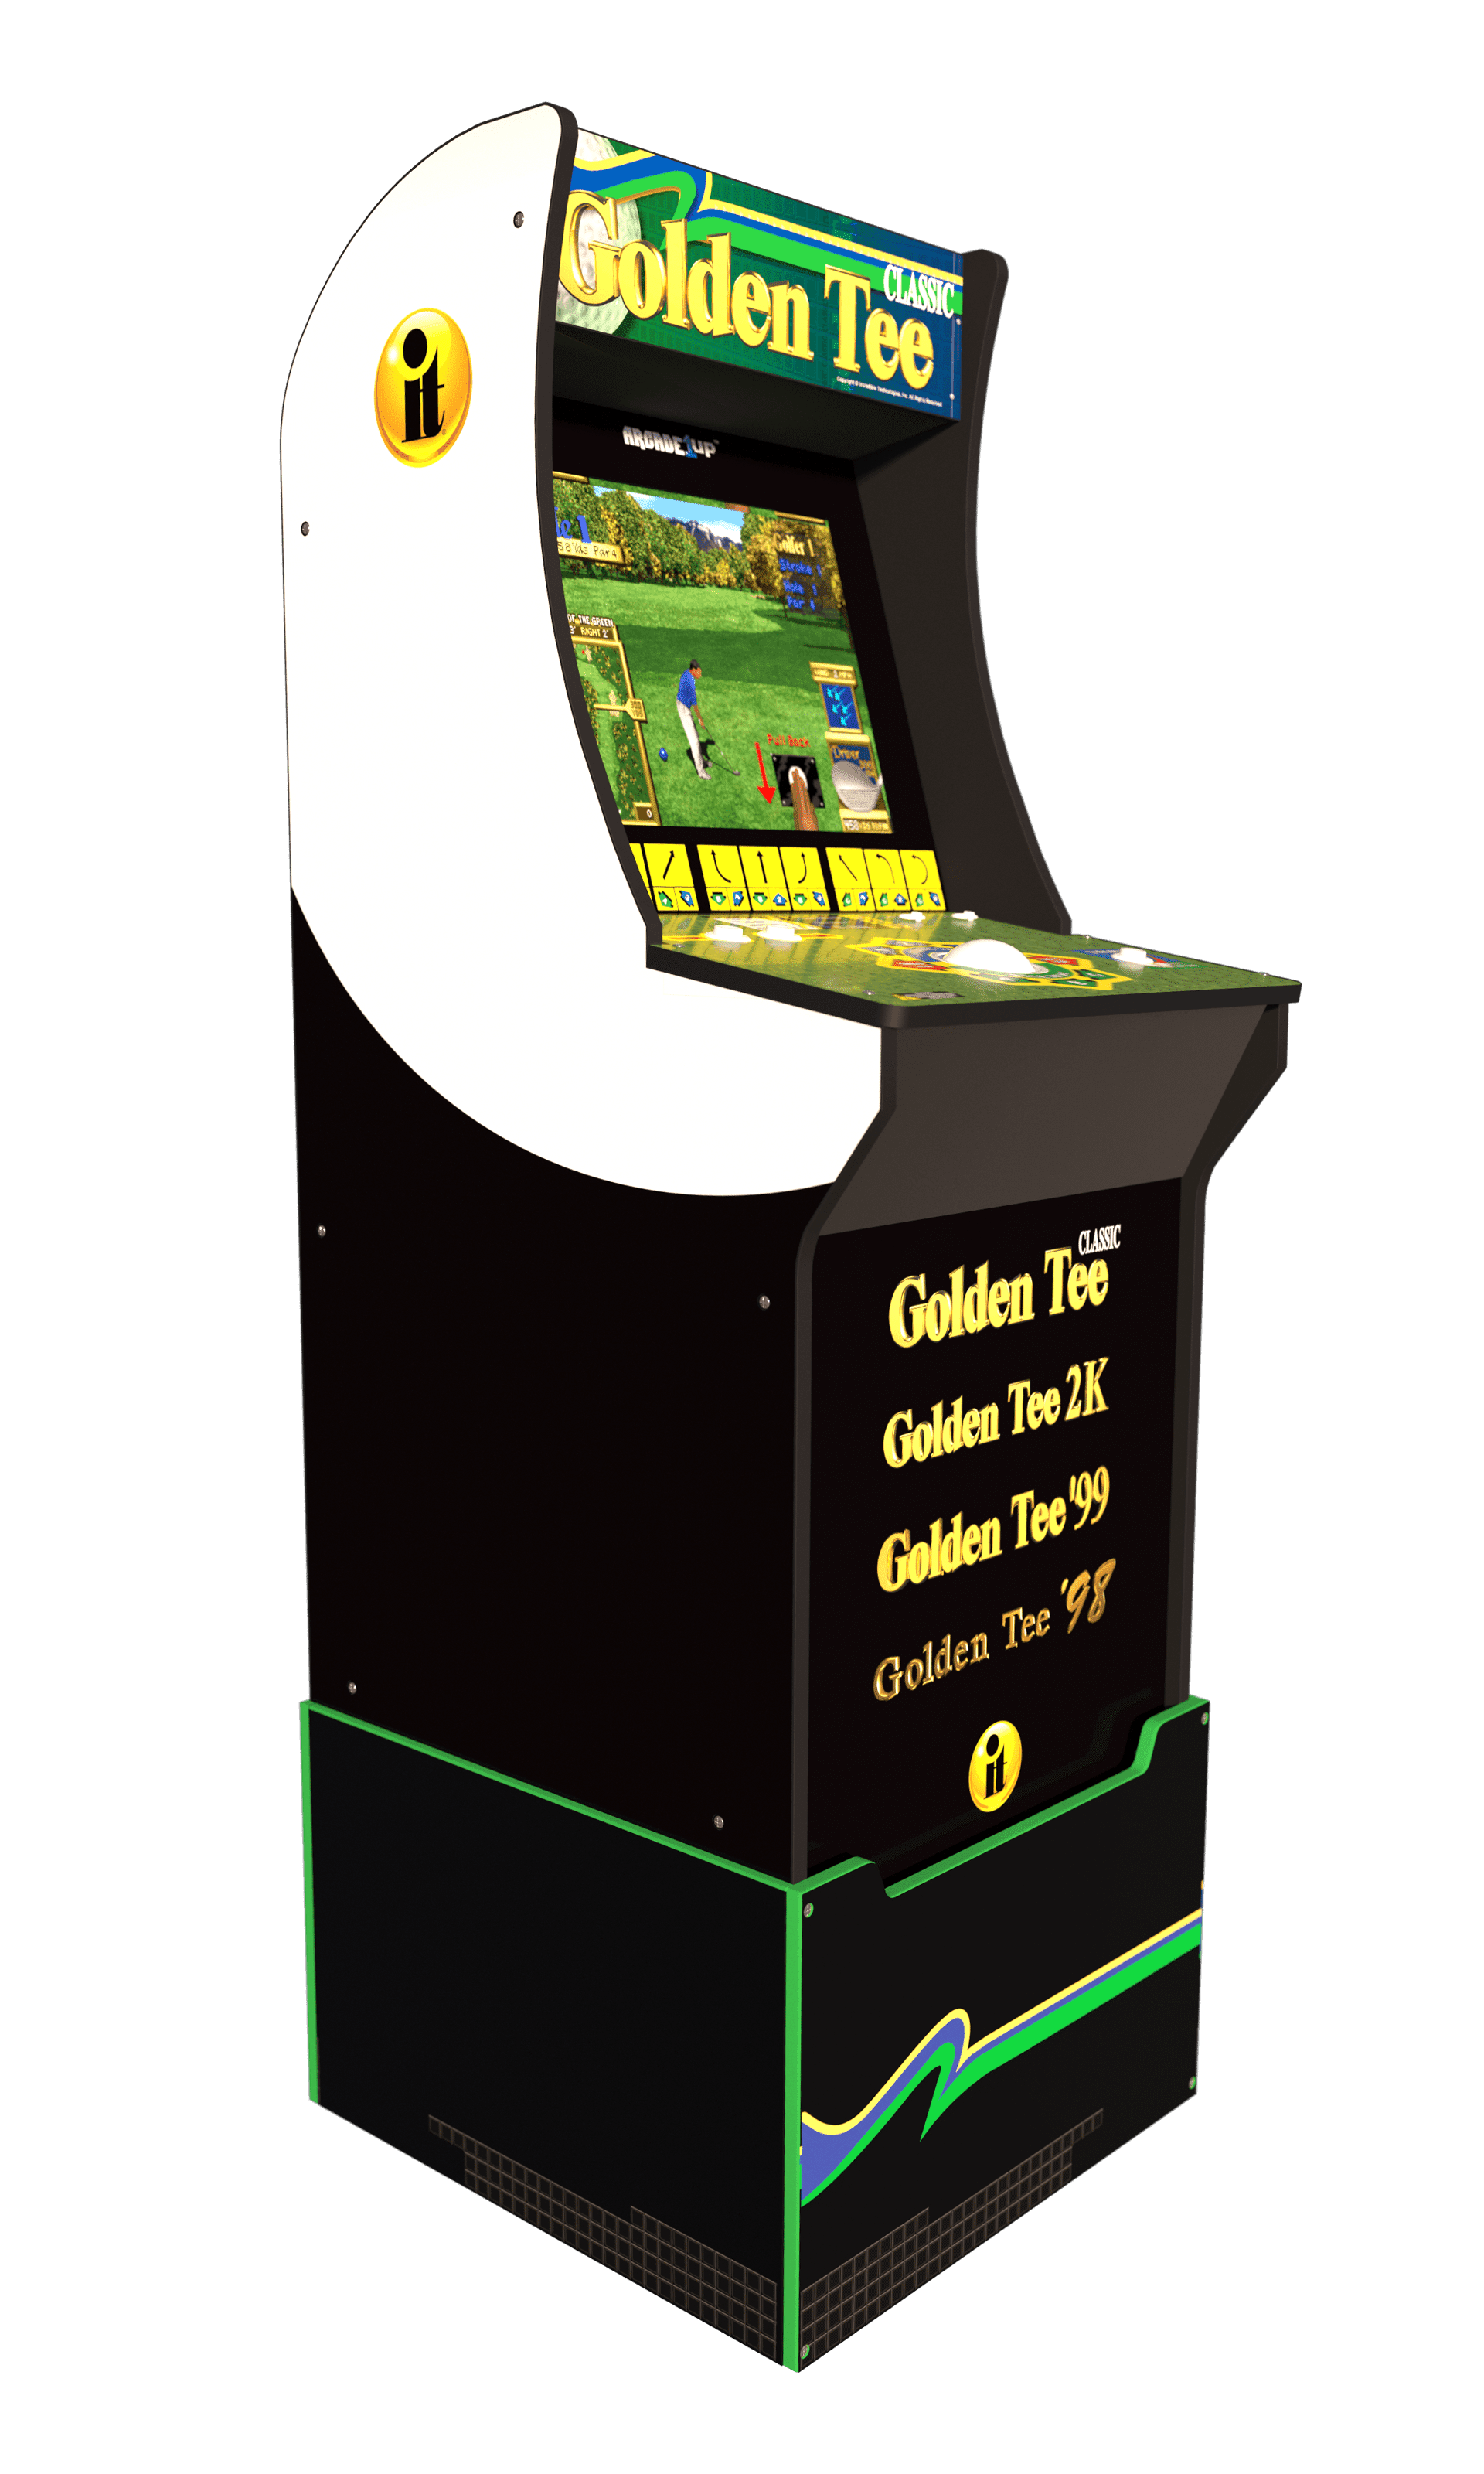 Buy Golden Tee PGA TOUR Home Edition Deluxe Online At $6599, 43% OFF